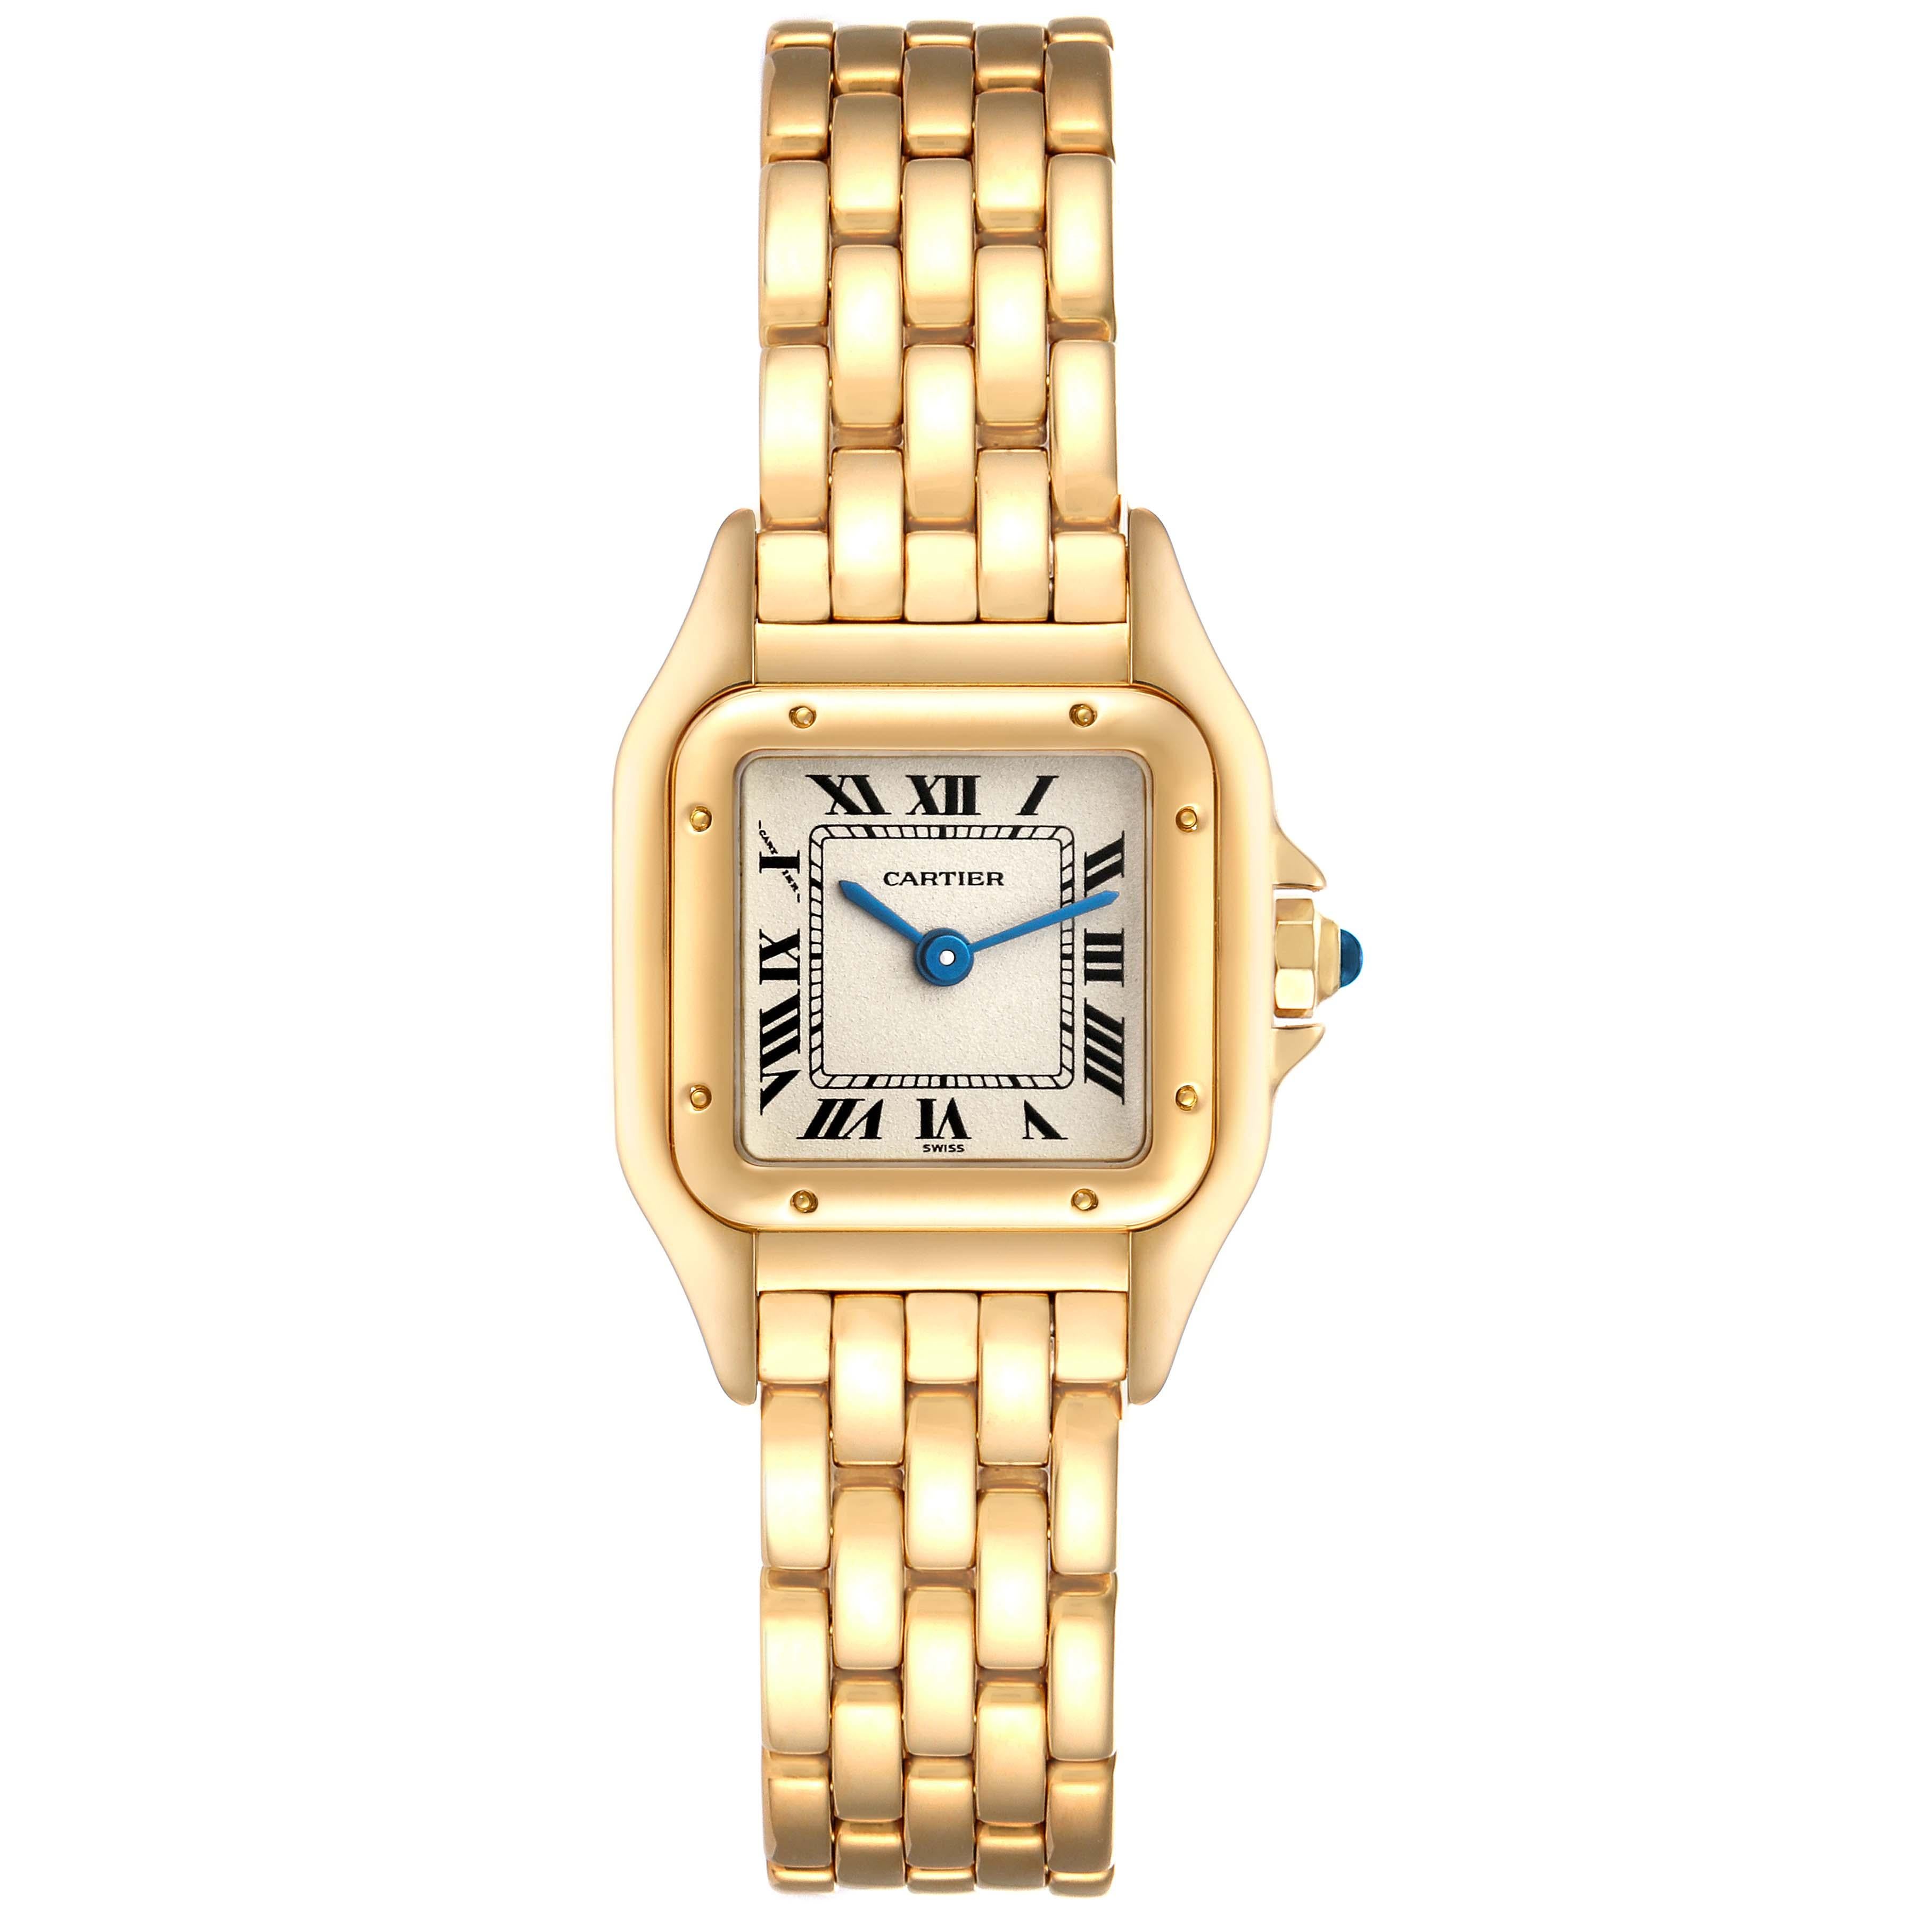 Cartier Panthere Yellow Gold Ladies Watch 107000. Quartz movement. 18k yellow gold case 22.0 x 22.0 mm (28.0 including the lugs). Octagonal crown set with blue sapphire cabochon. 18k yellow gold polished bezel, secured with 8 pins. Scratch resistant